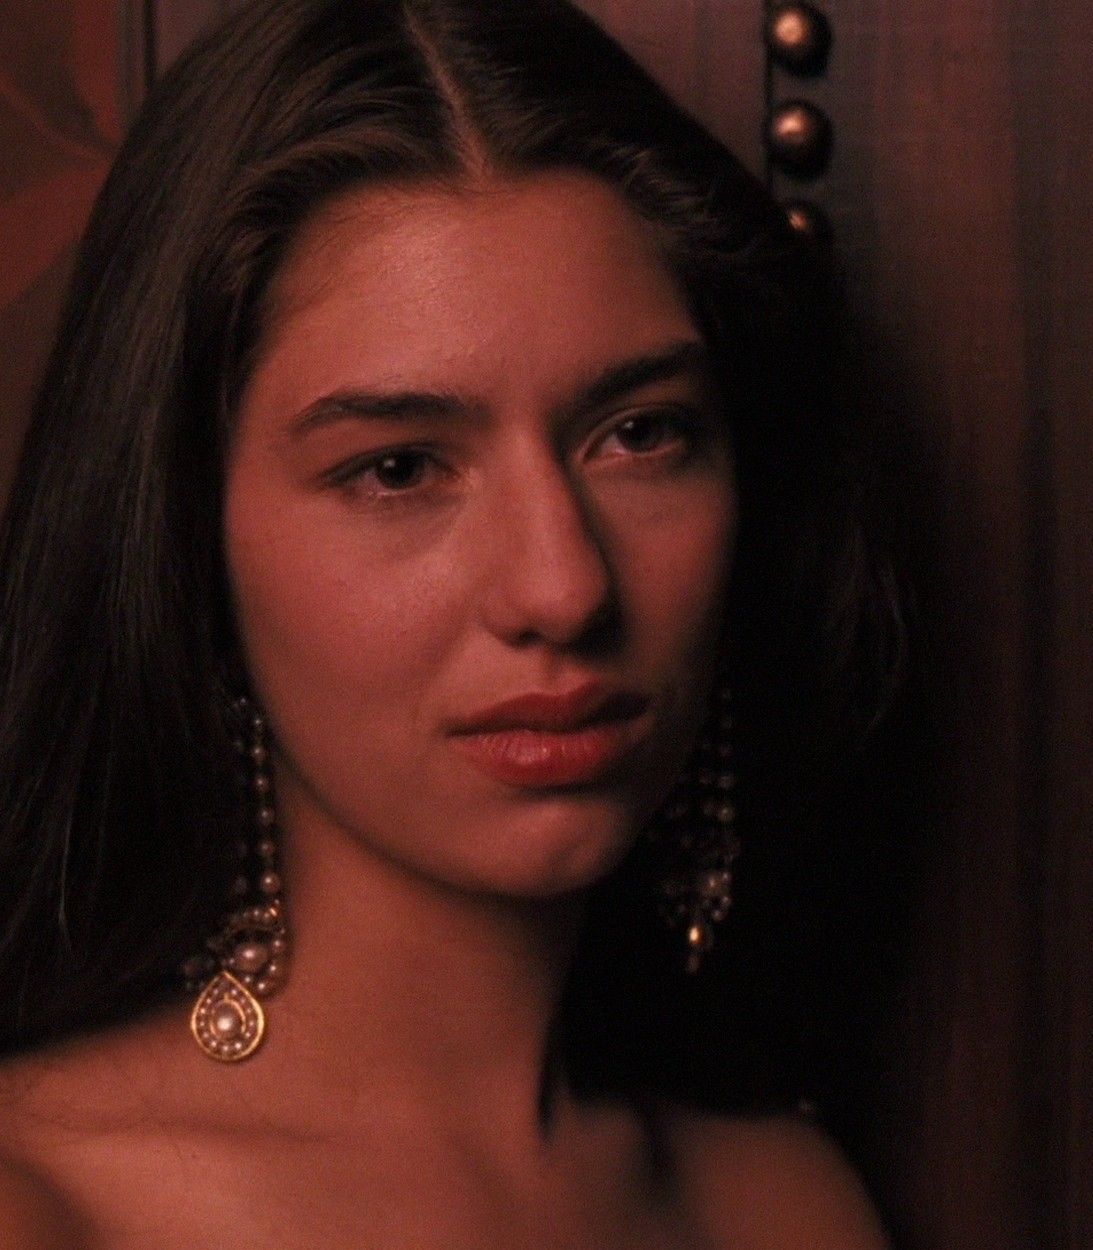 Sofia Coppola as Mary Corleone in Godfather 3 vertical